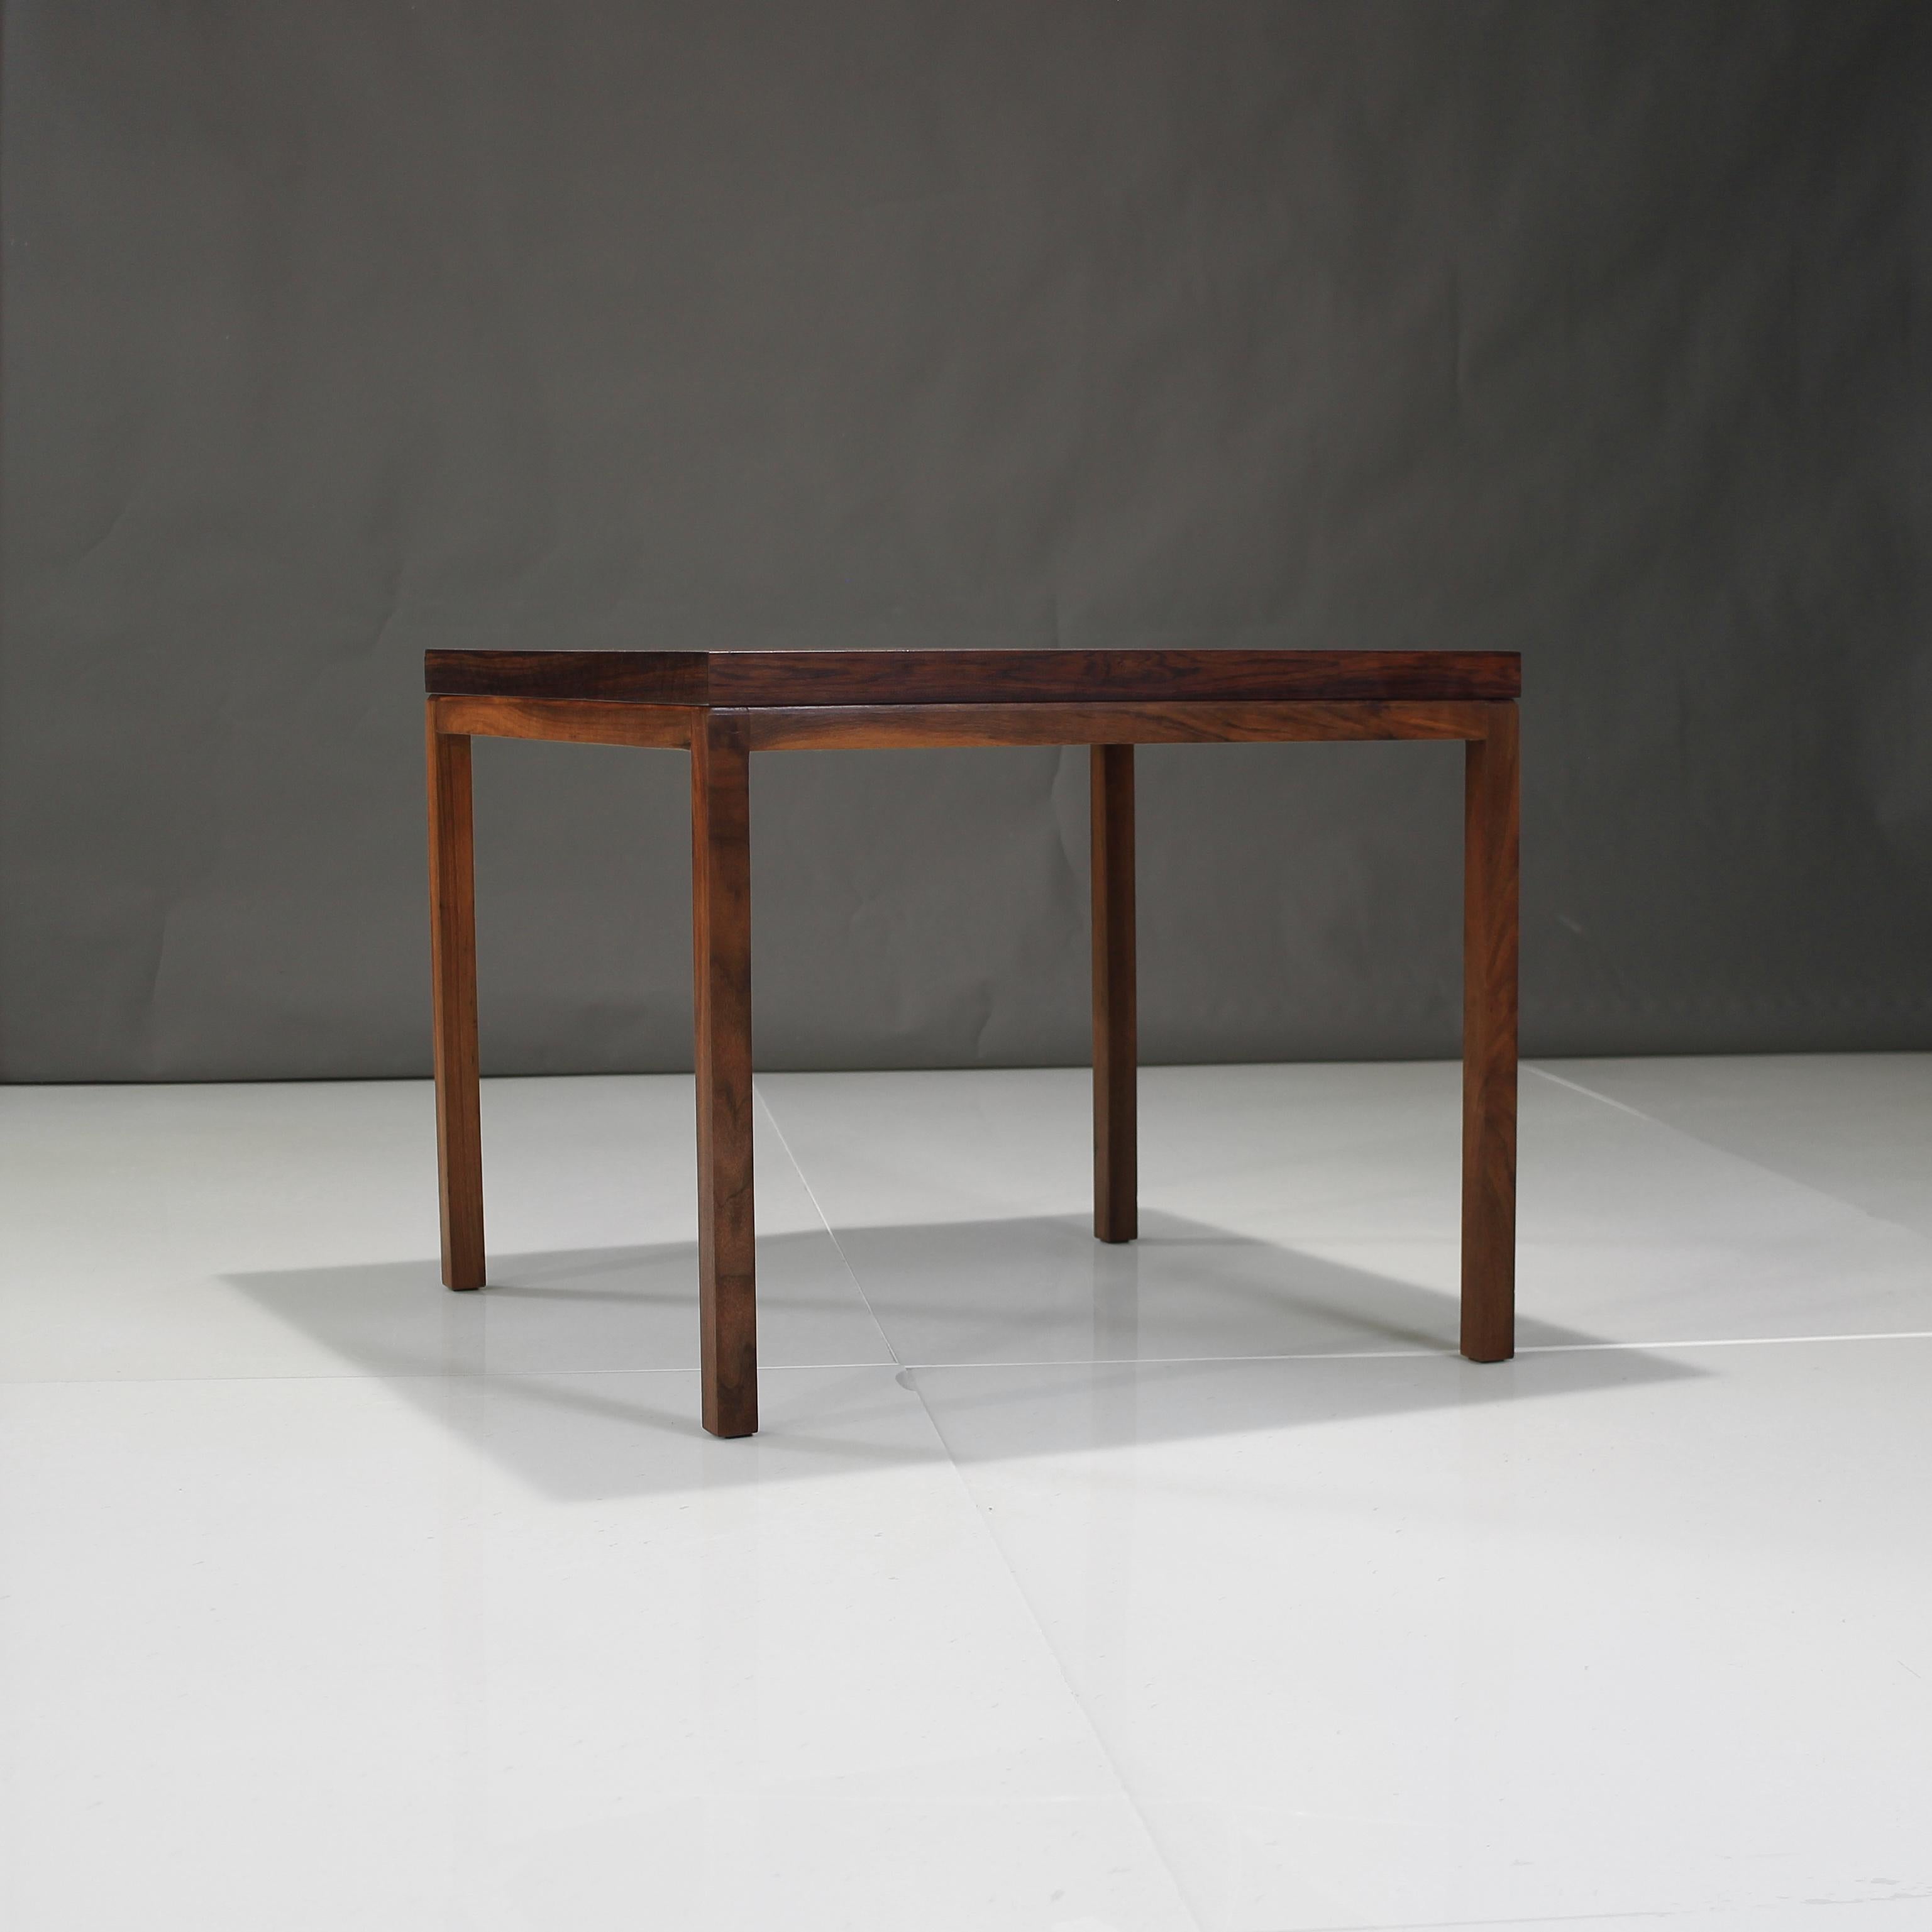 About this Milo Baughman for Thayer Coggin Rosewood table:

This piece is truly a show stopper and can be used for a variety of purposes in yours or you client's space.  The beautiful clean lines of this table showcase the rosewood in a lovely